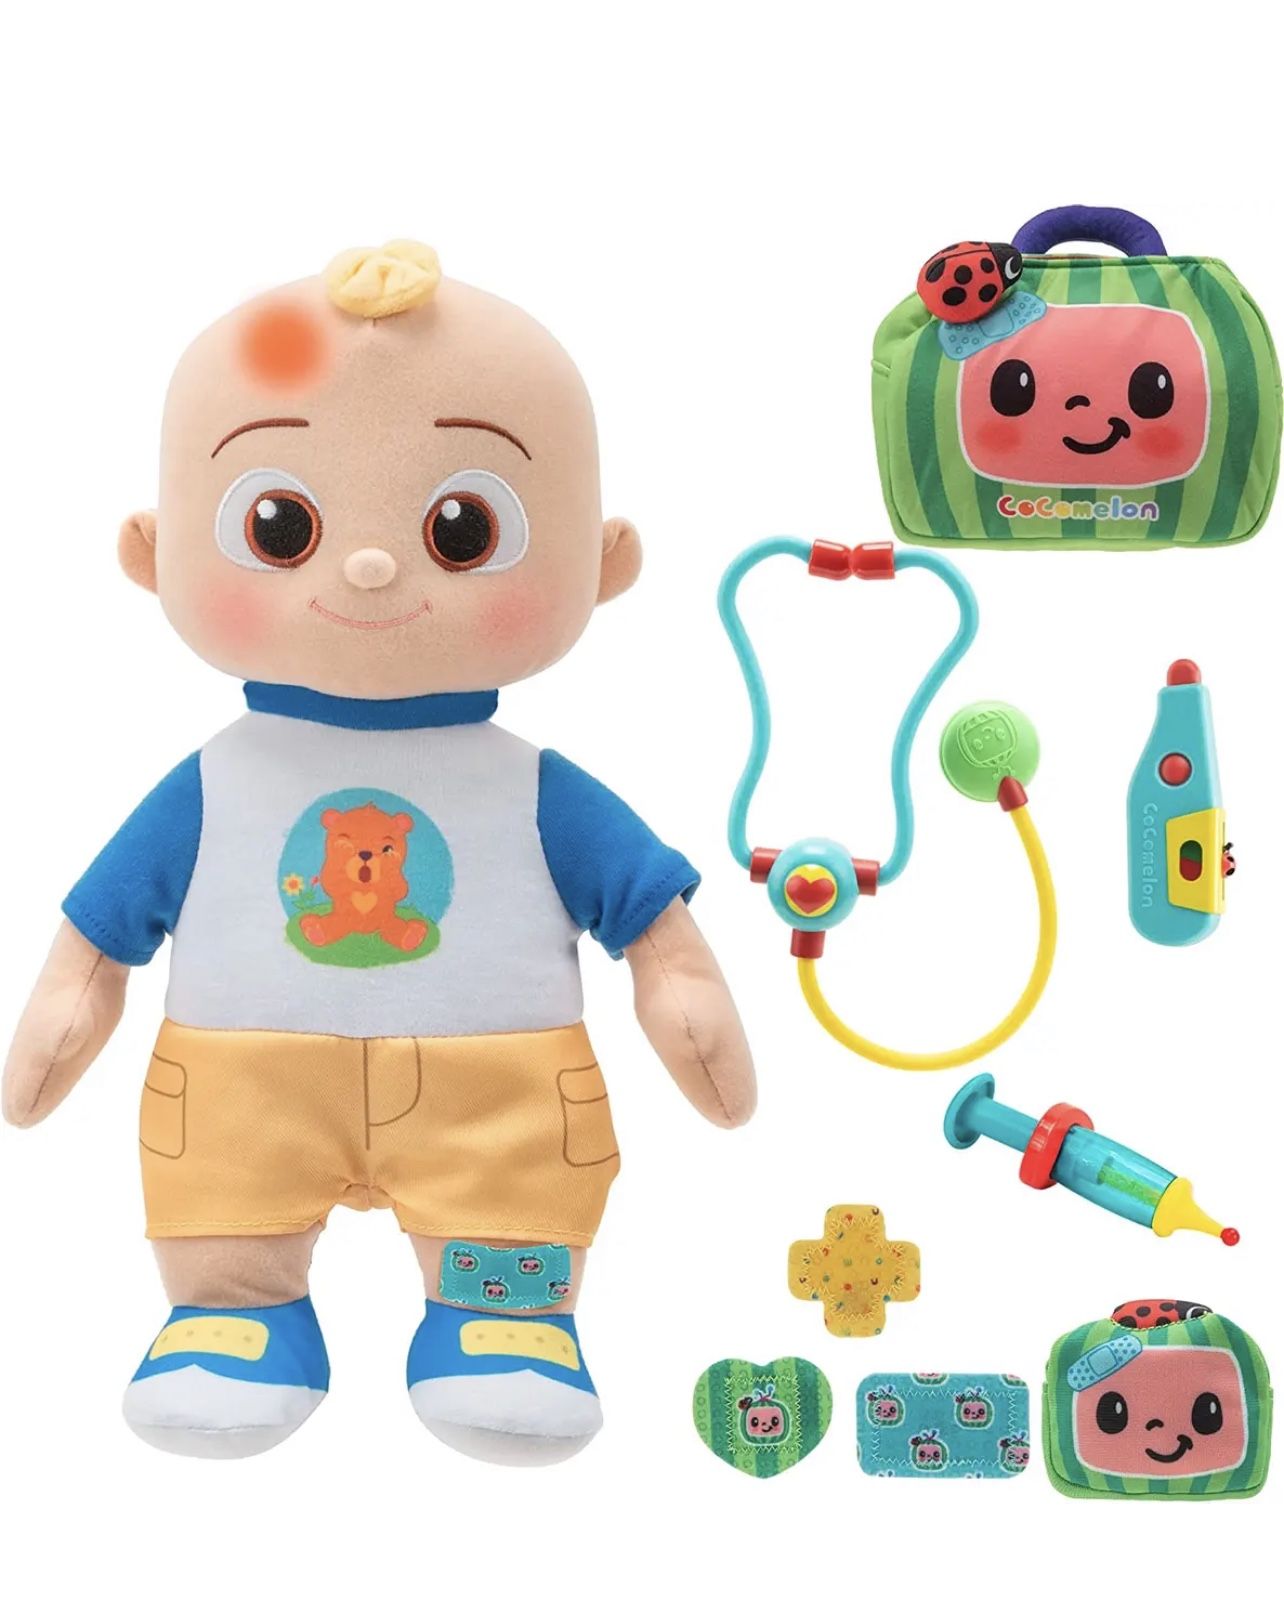 Brand New Cocomelon Doll With Sounds